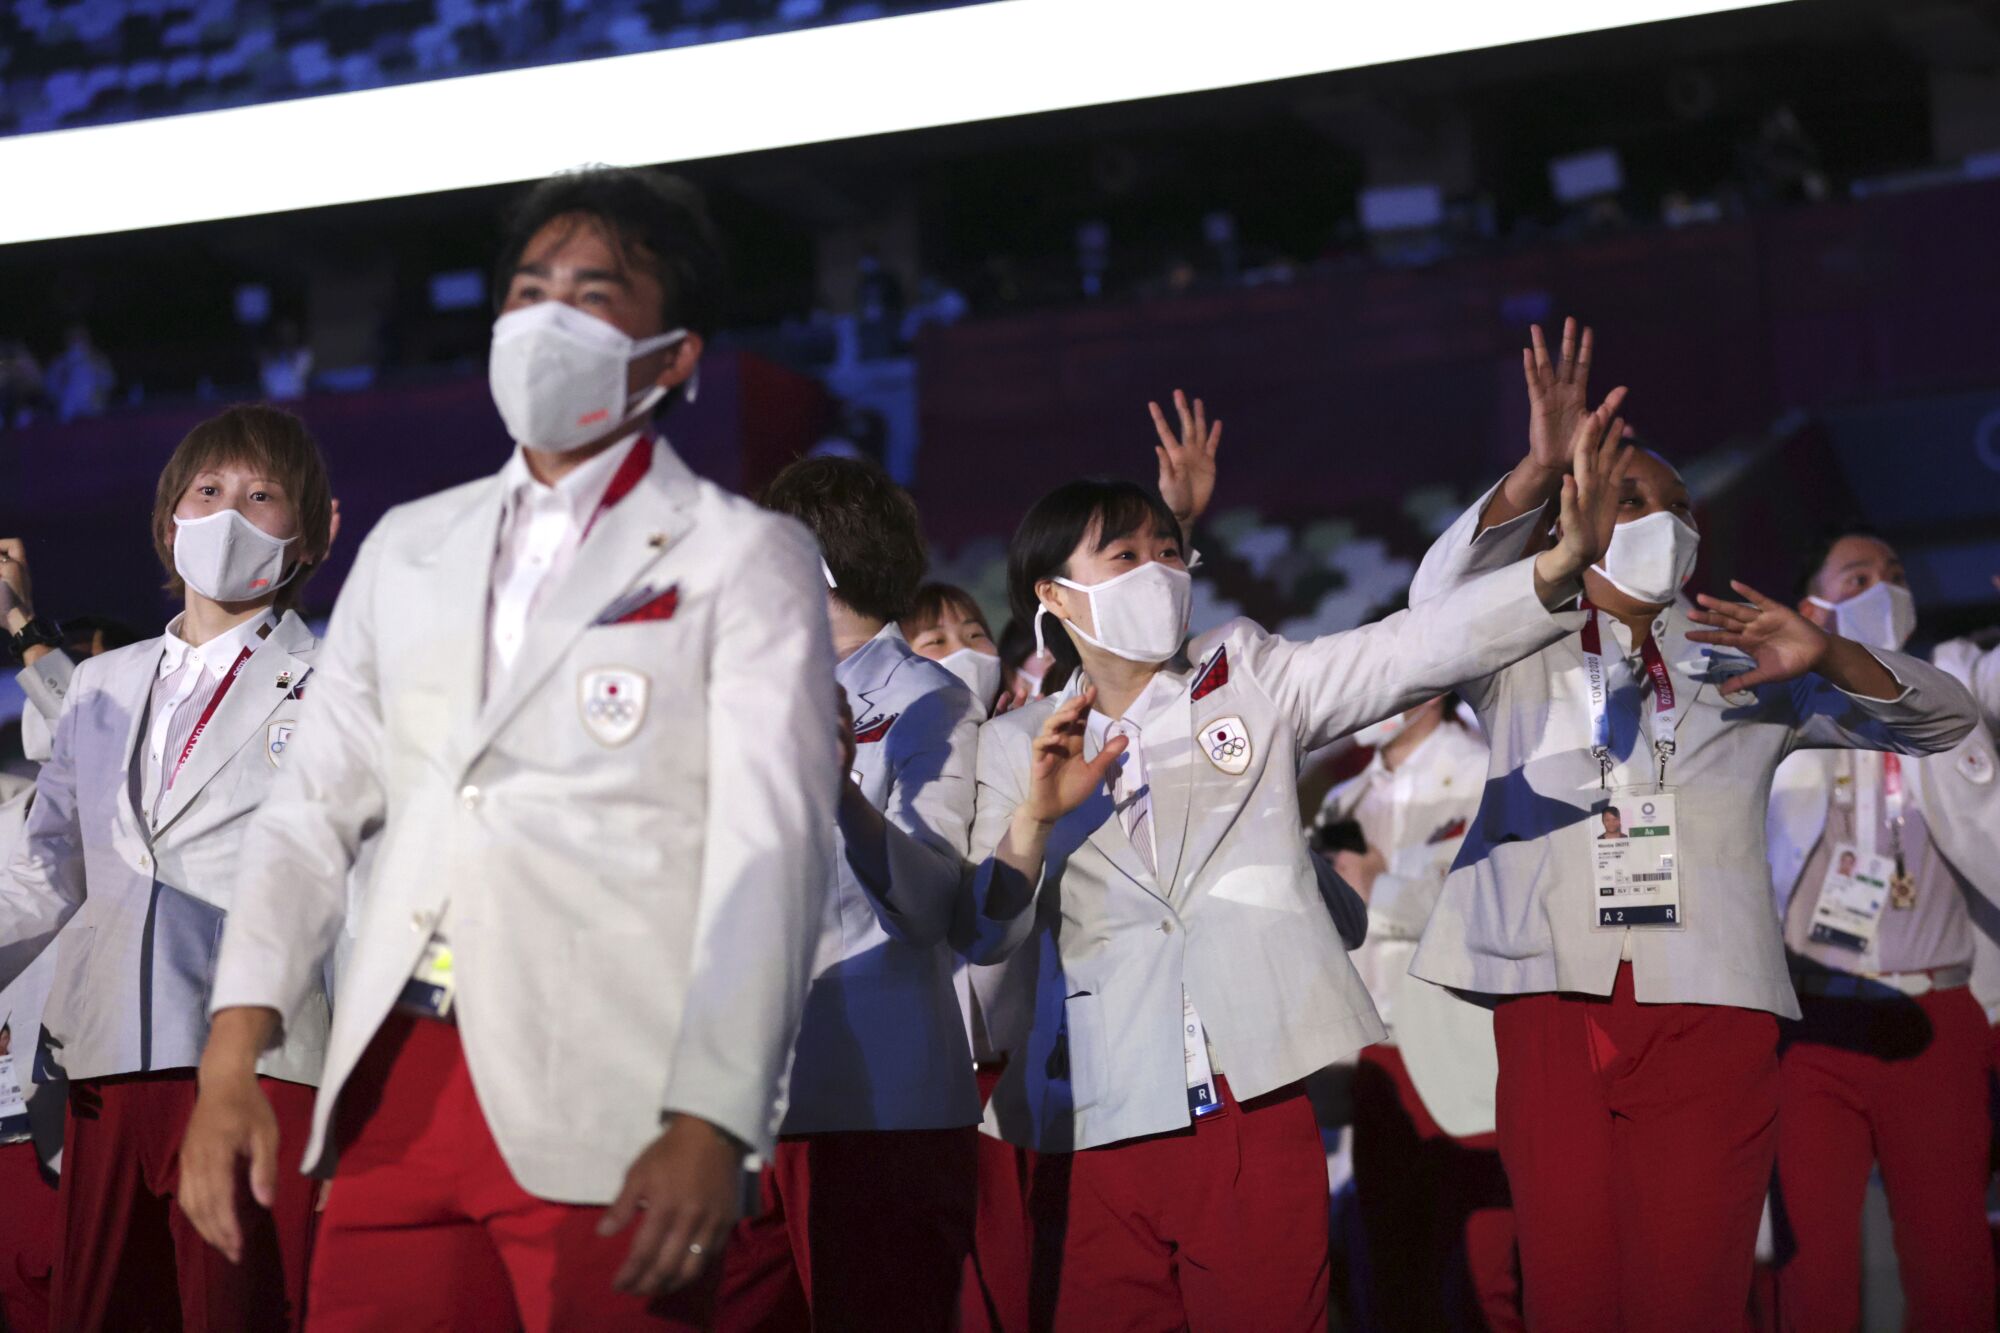 Members of Team Japan arrive during the opening ceremony.